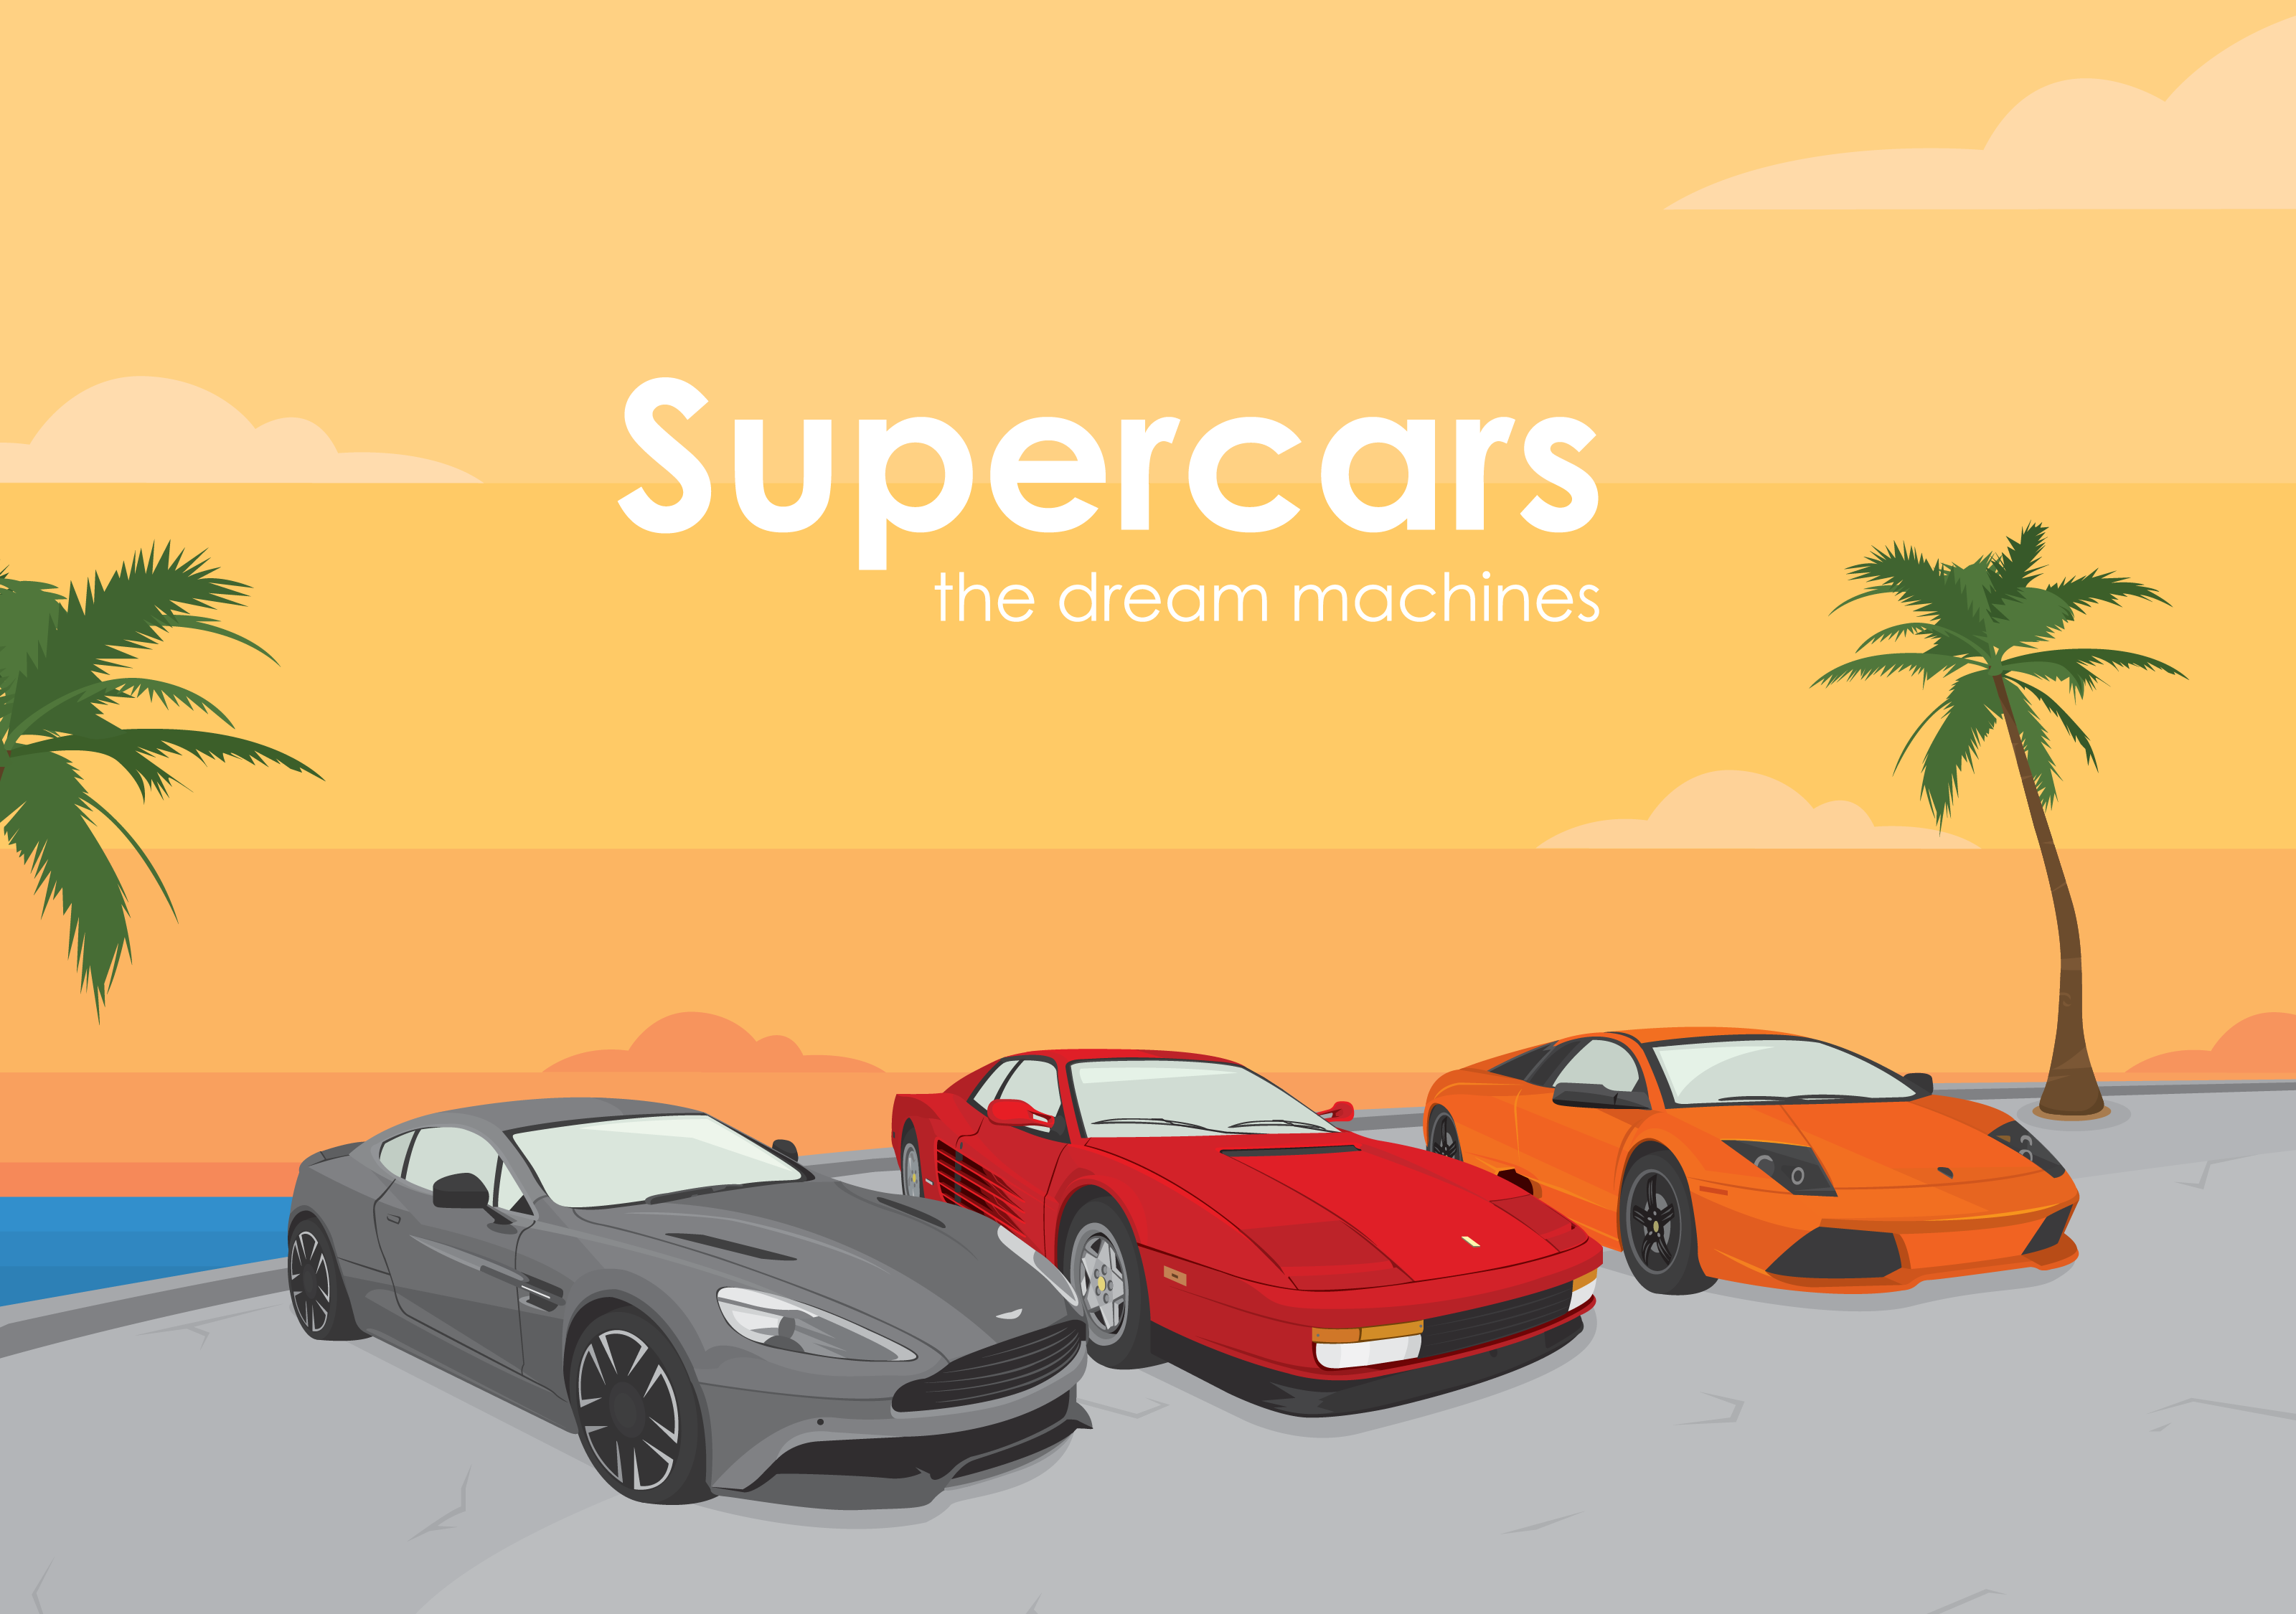 Supercars - The Dream Machines Home Page